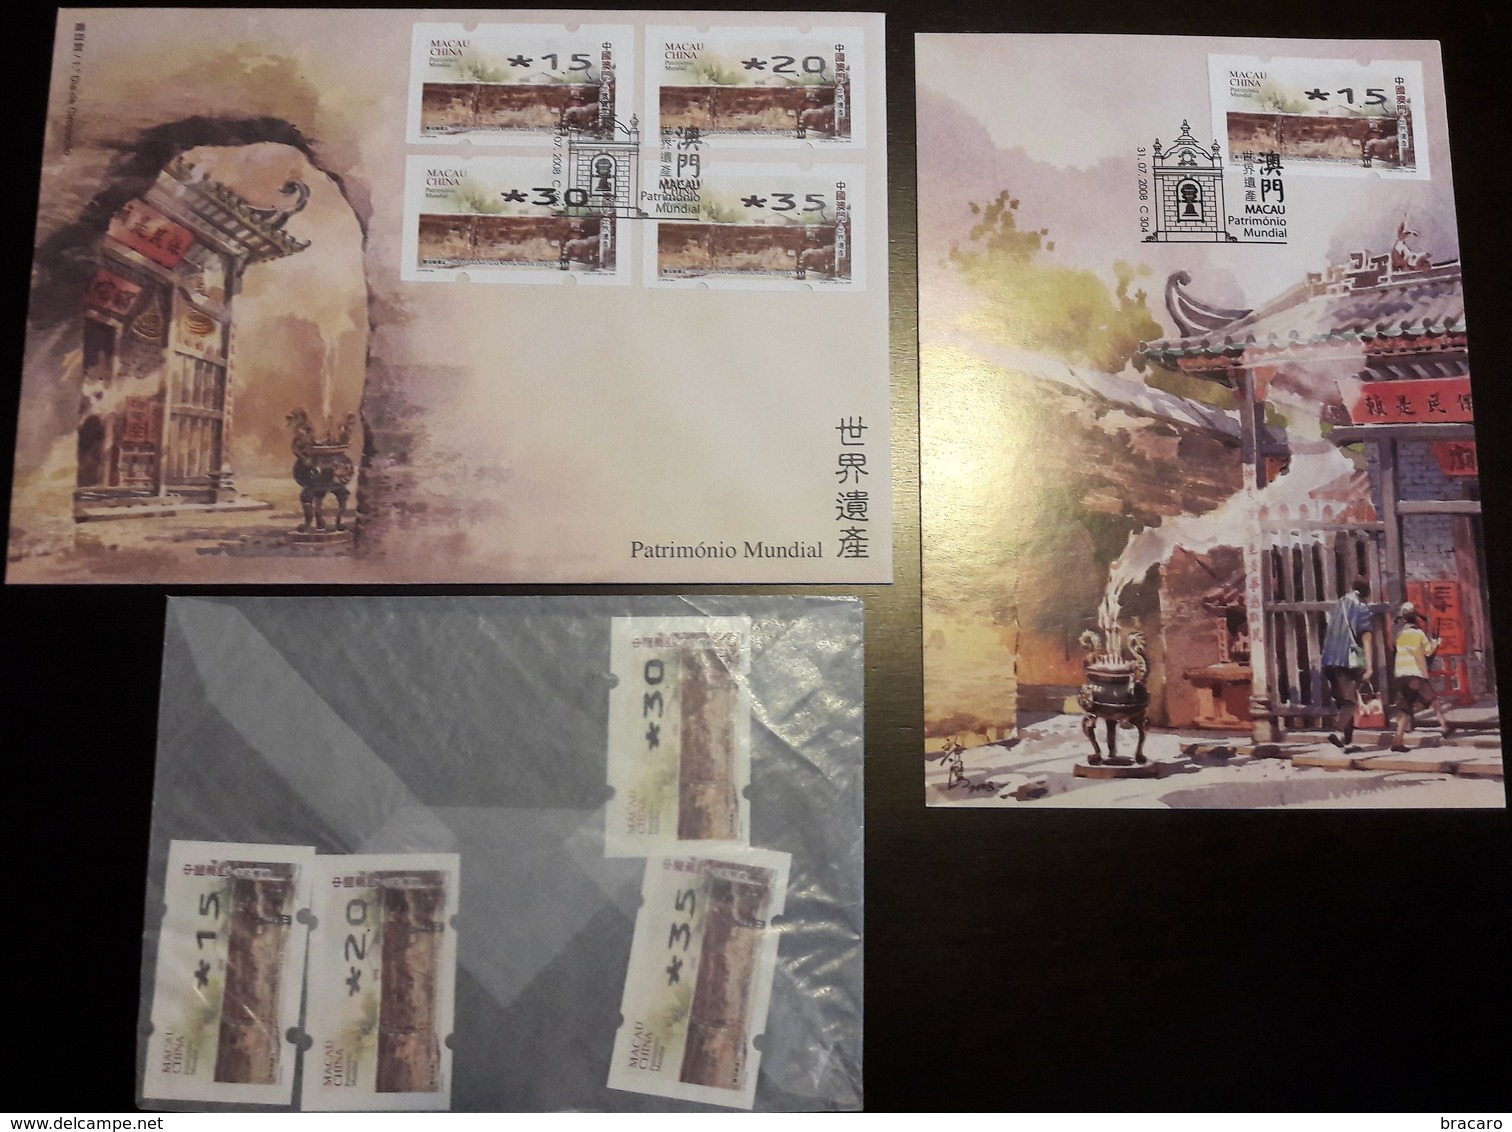 MACAU / MACAO (CHINA) - World Heritage 2008 - Full Set Stamps + FDC + 9 Maximum Cards + Full Set ATM + FDC ATM + Leaflet - Colecciones & Series